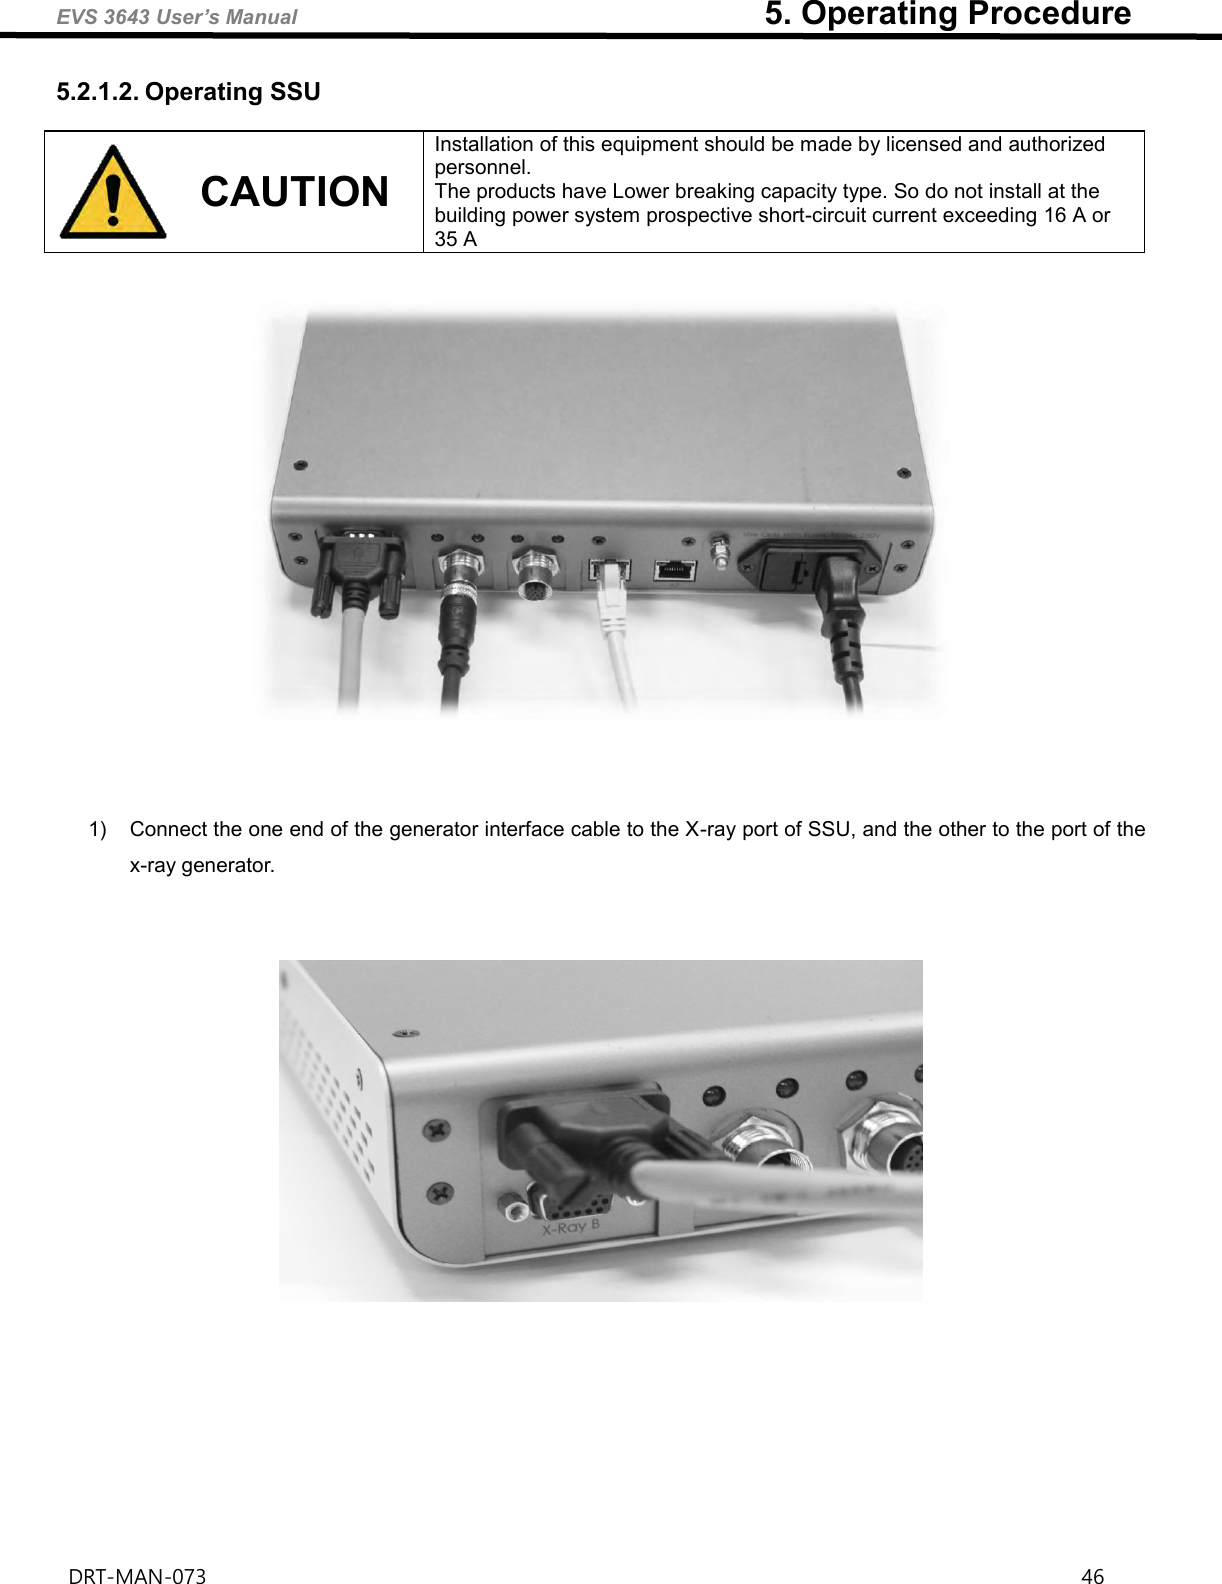 EVS 3643 User’s Manual                                                        5. Operating Procedure DRT-MAN-073                                                                                                                                                                46   5.2.1.2. Operating SSU  CAUTION Installation of this equipment should be made by licensed and authorized personnel.   The products have Lower breaking capacity type. So do not install at the building power system prospective short-circuit current exceeding 16 A or 35 A        1)  Connect the one end of the generator interface cable to the X-ray port of SSU, and the other to the port of the x-ray generator.          